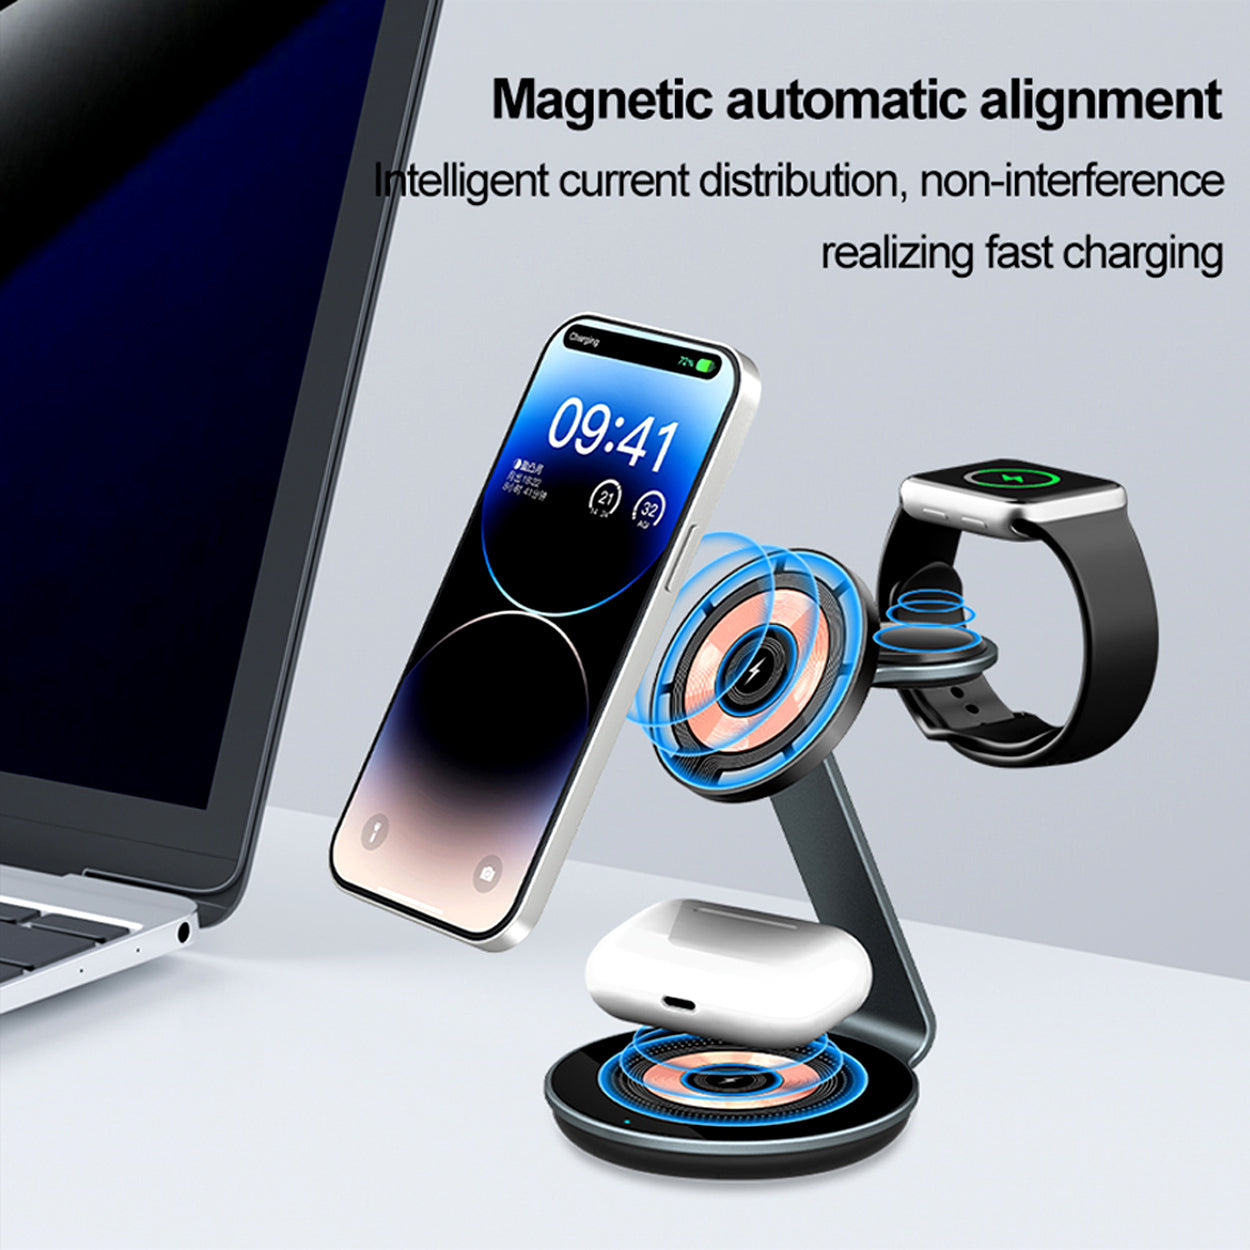 3-in-1 Magnetic Wireless Charging Station - VS2 - 4